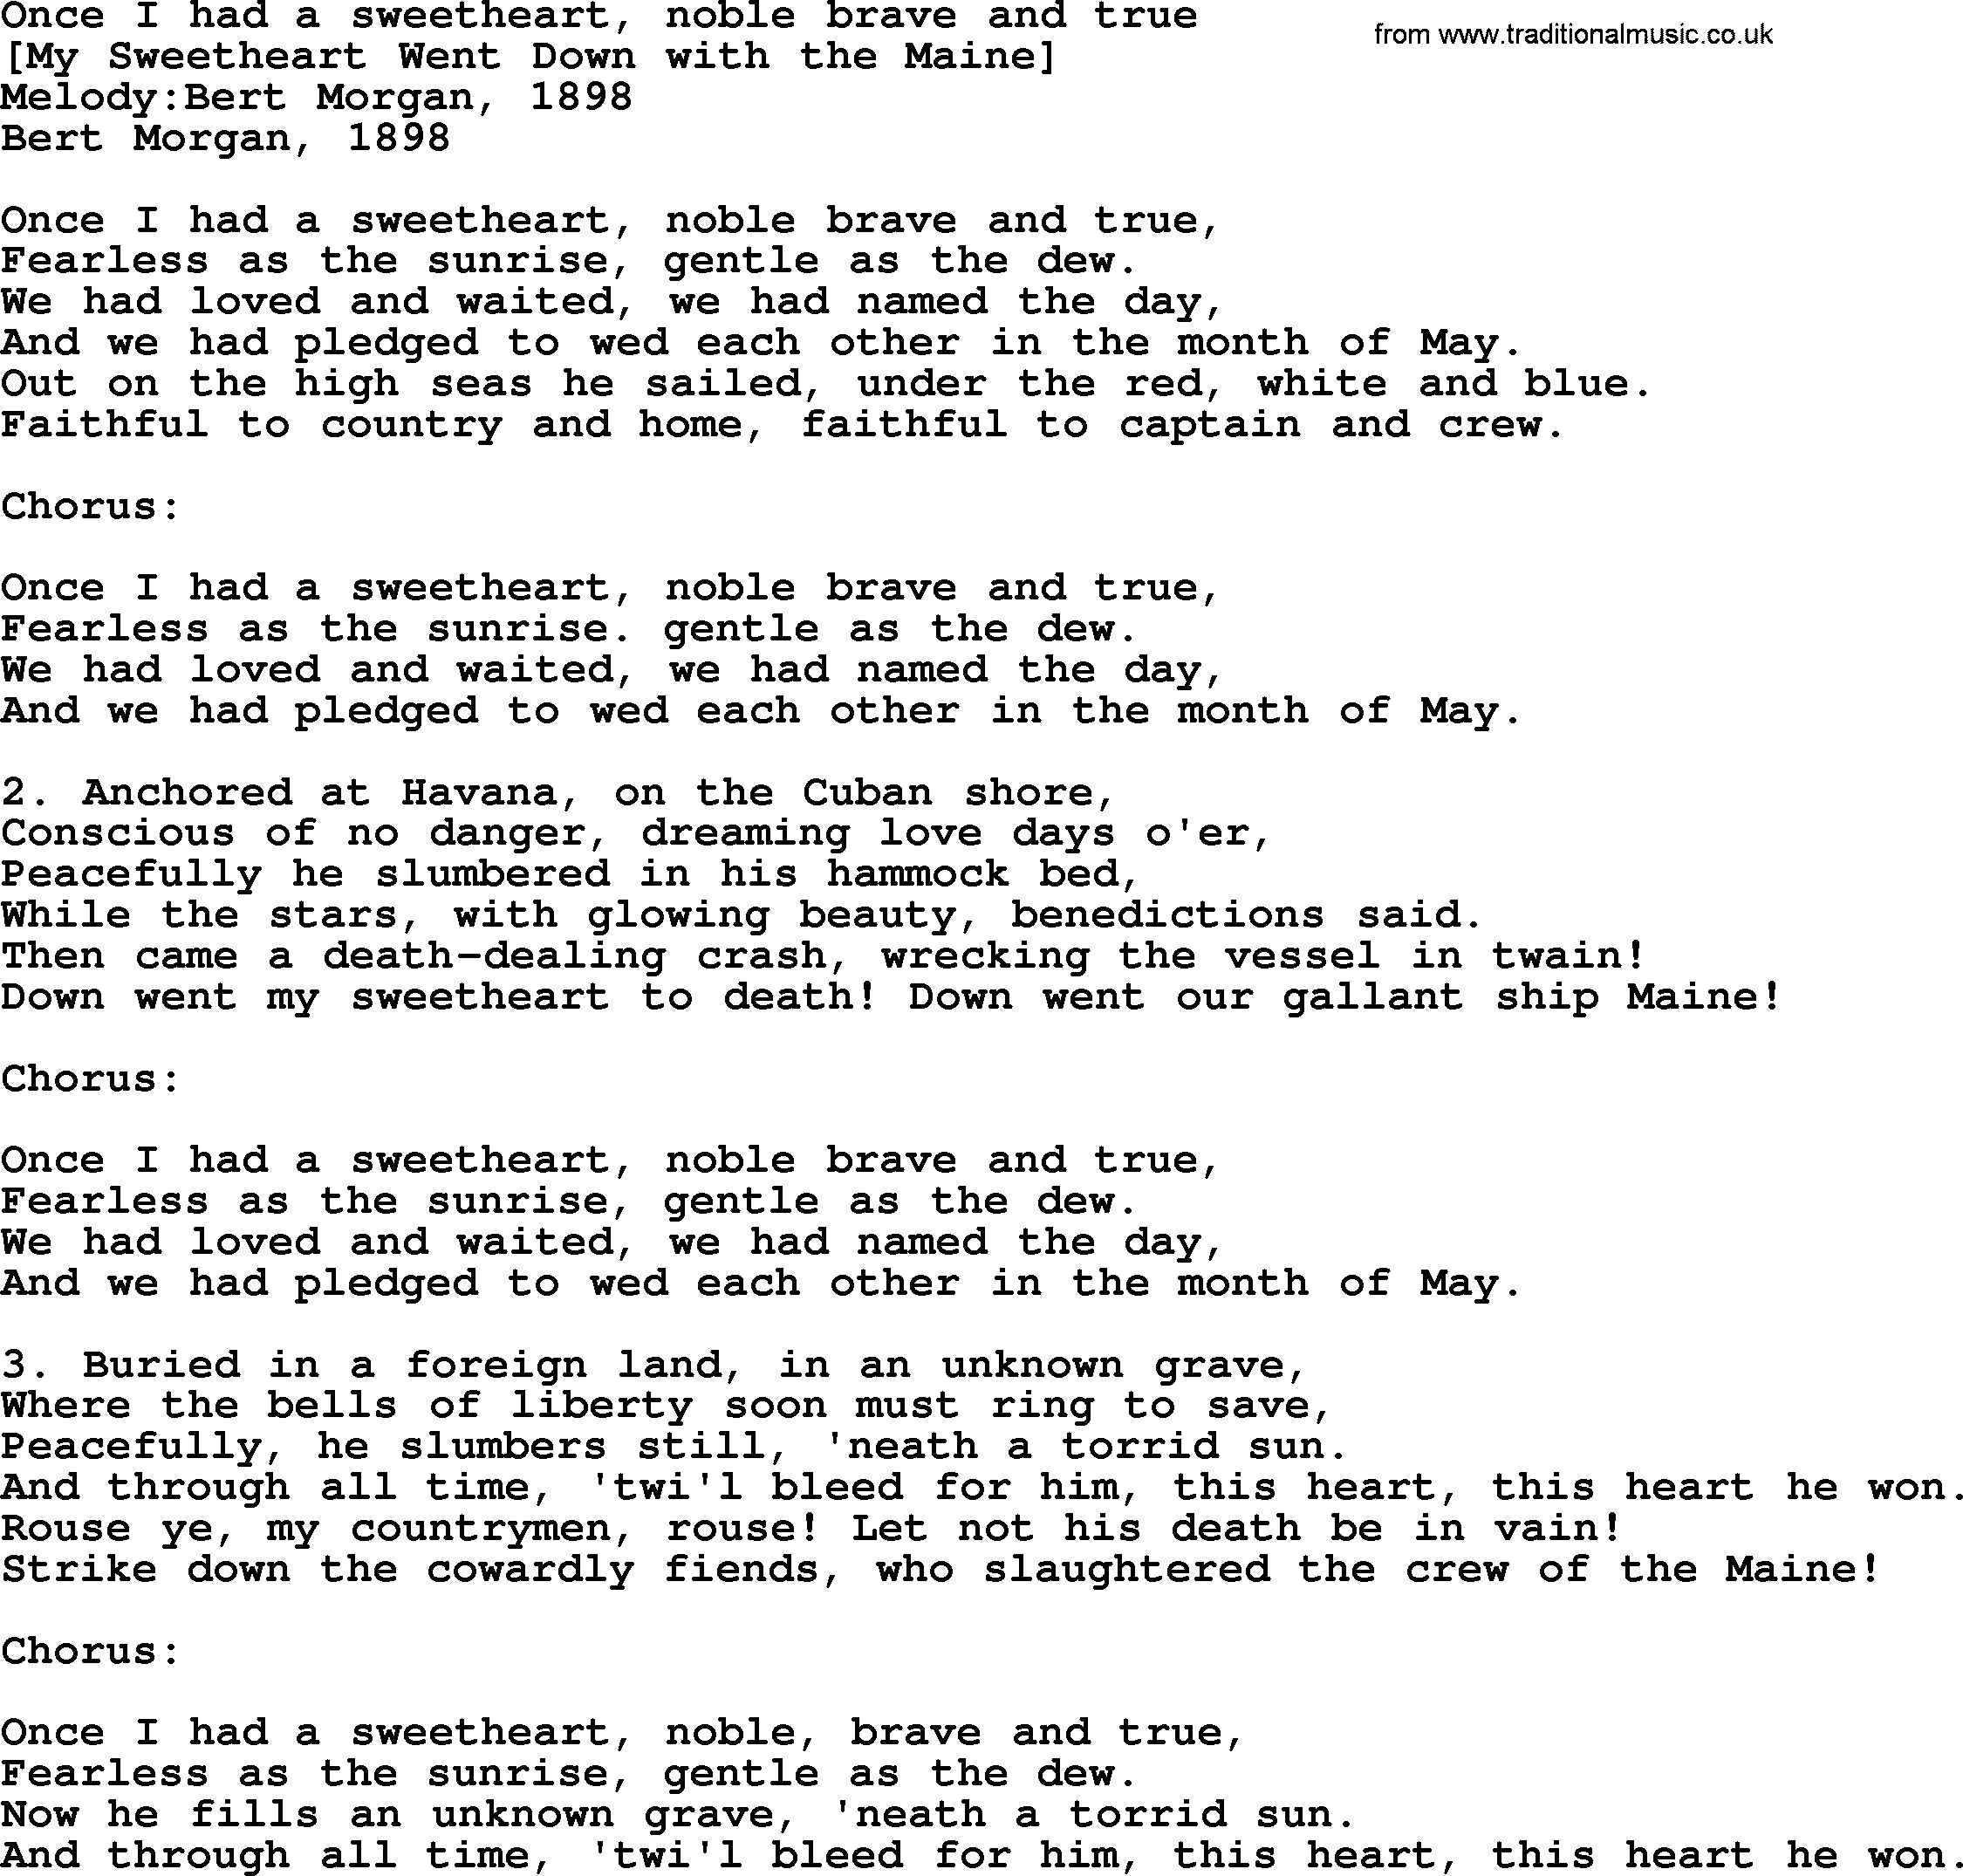 Old American Song: Once I Had A Sweetheart, Noble Brave And True, lyrics